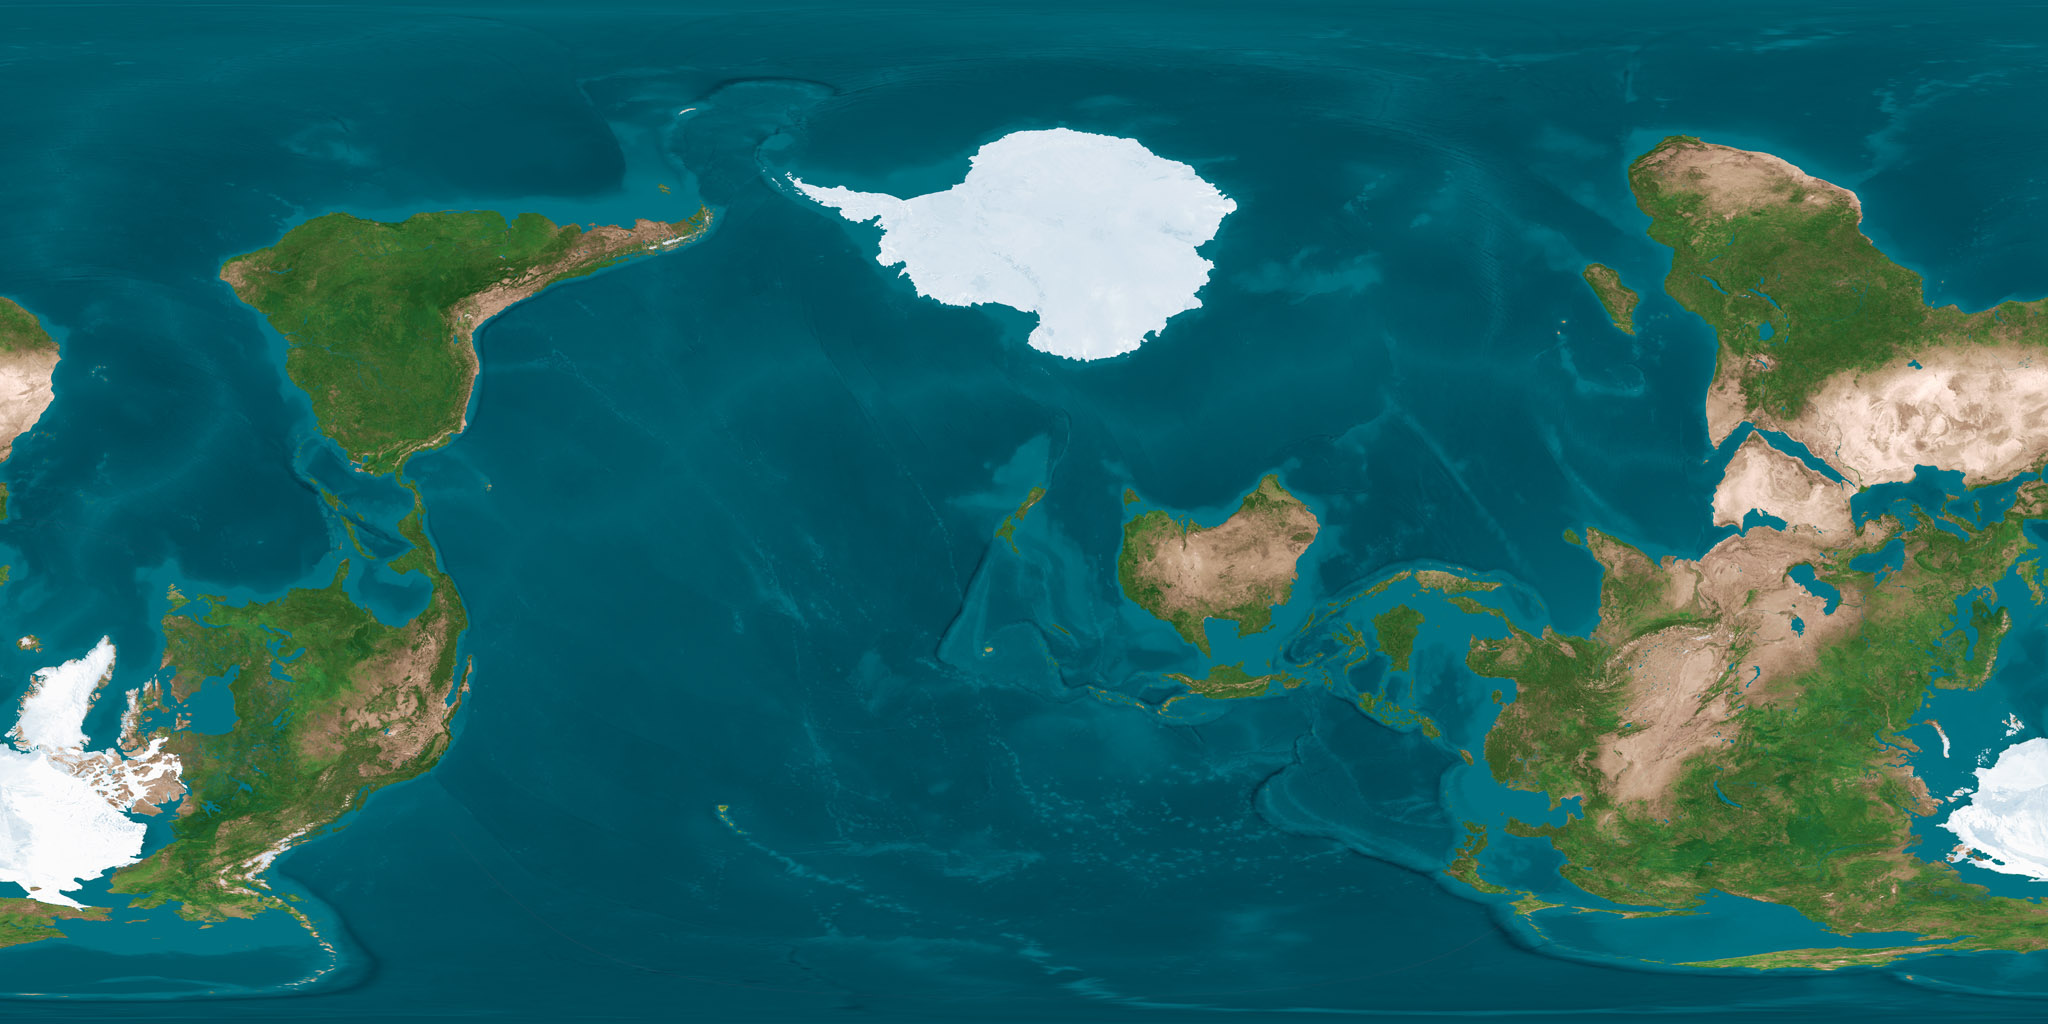 australia_pacific_centered_map_of_the_world_south_up.jpg